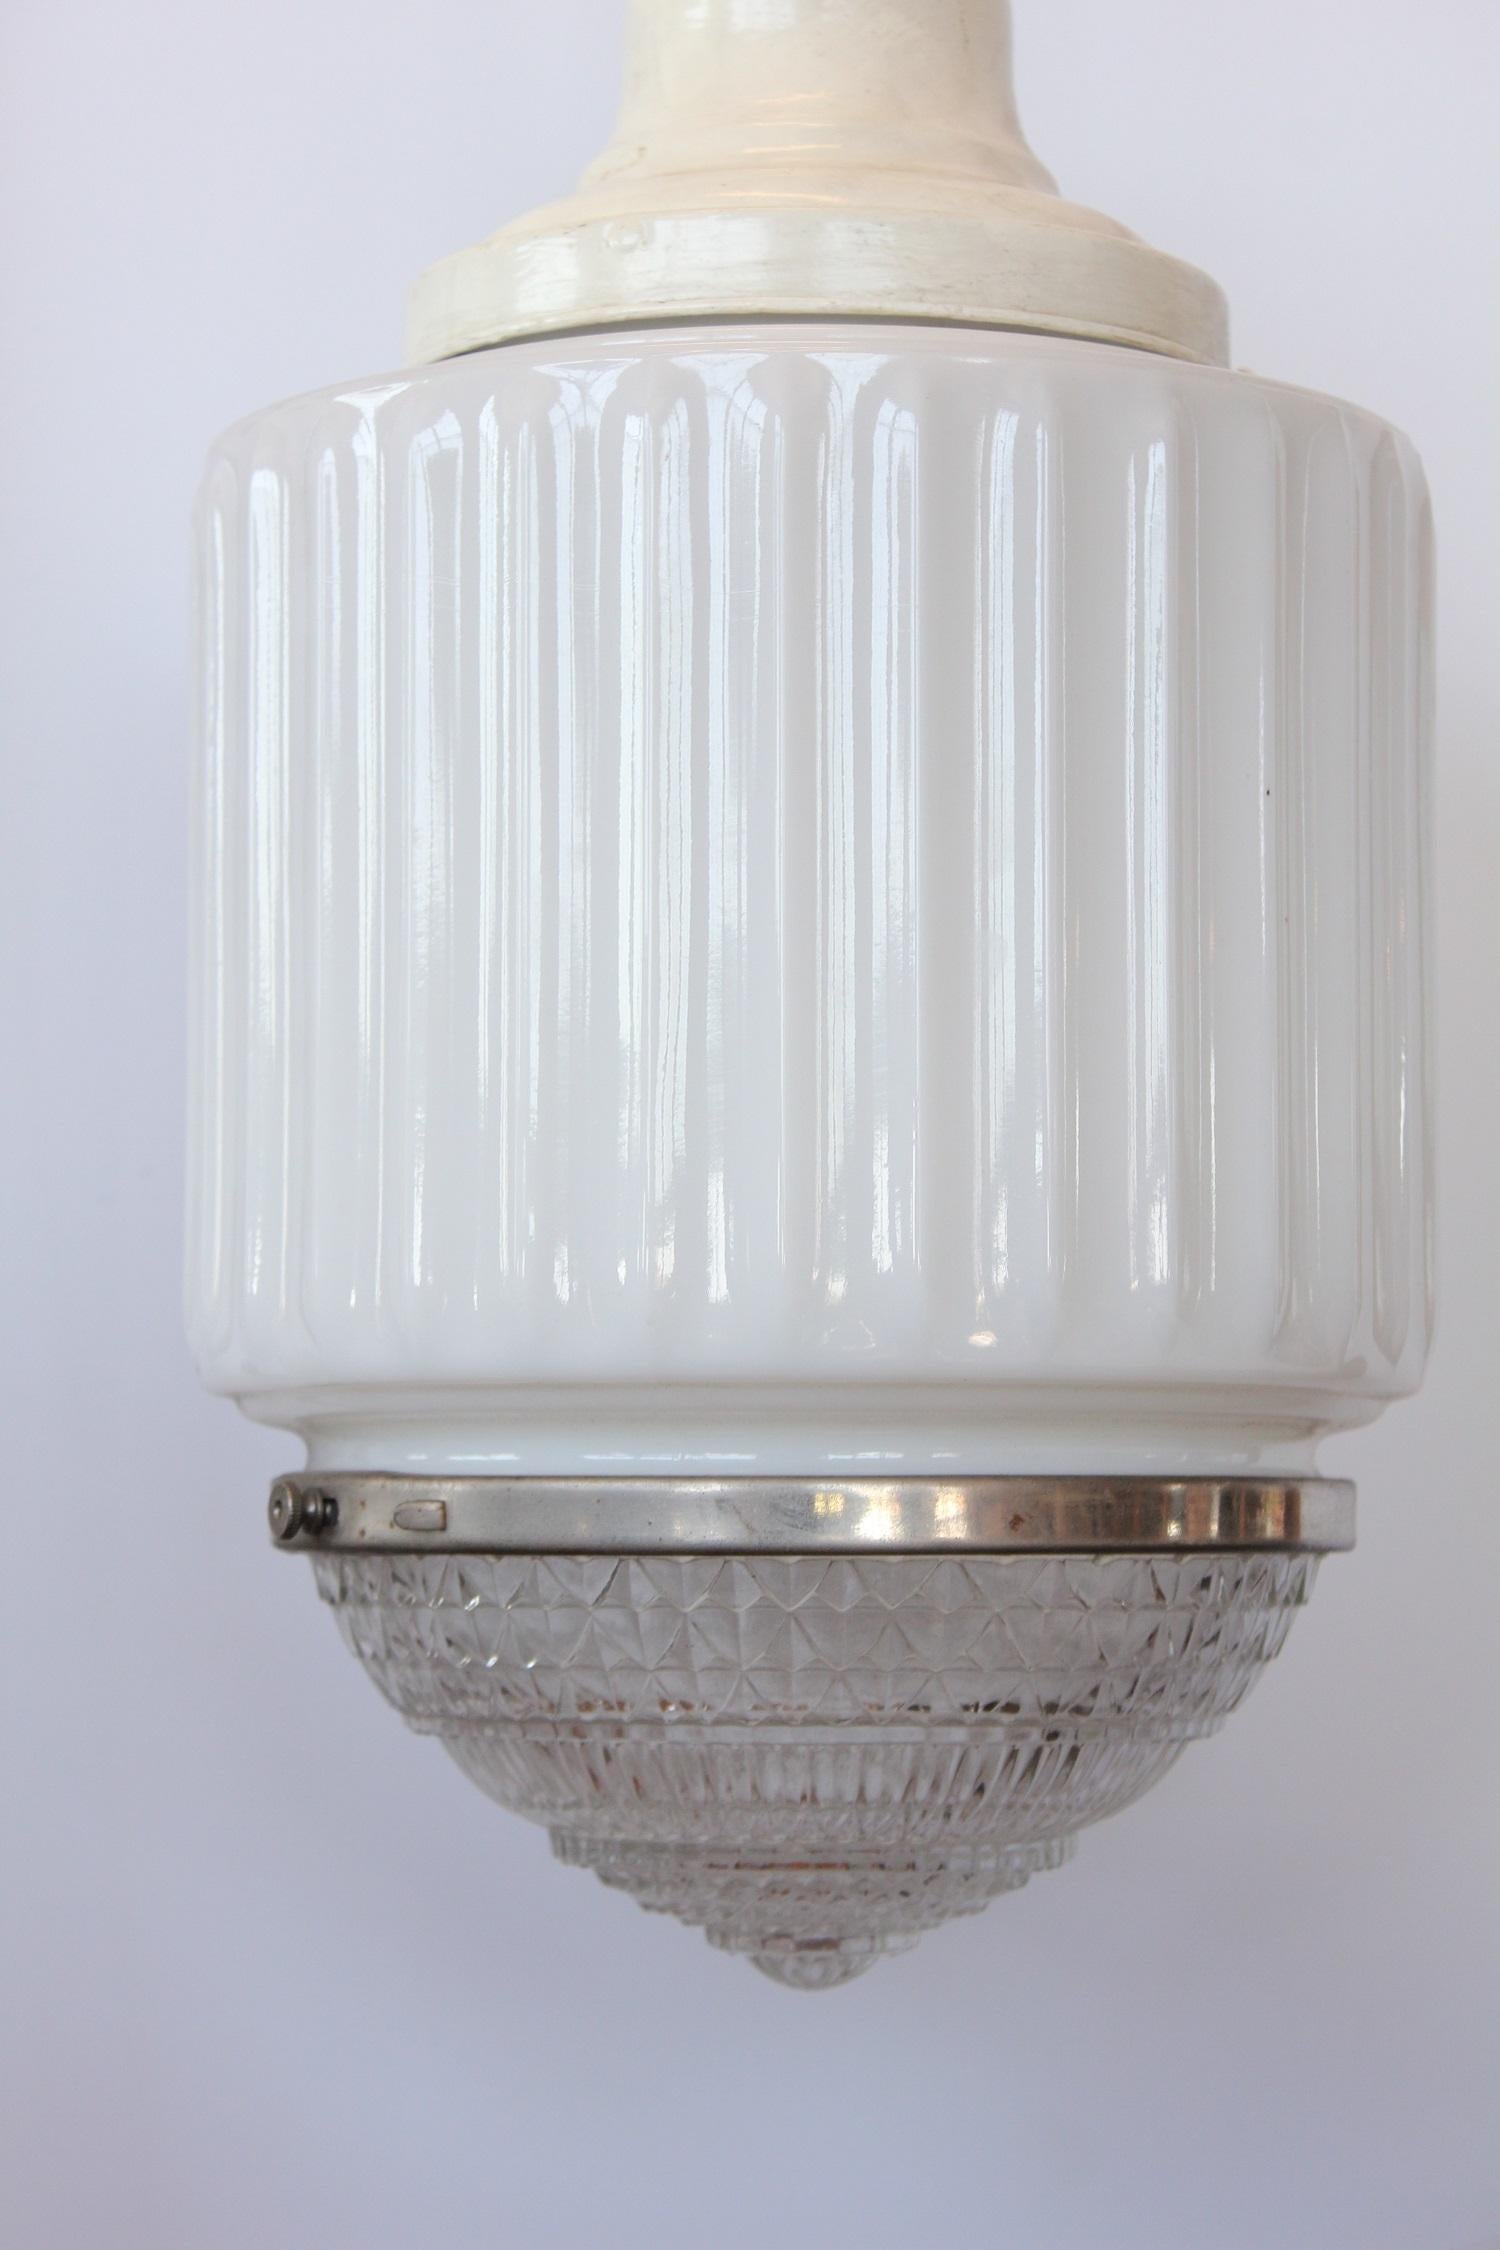 Antique department store milk glass pendant light with patterned glass bottom.